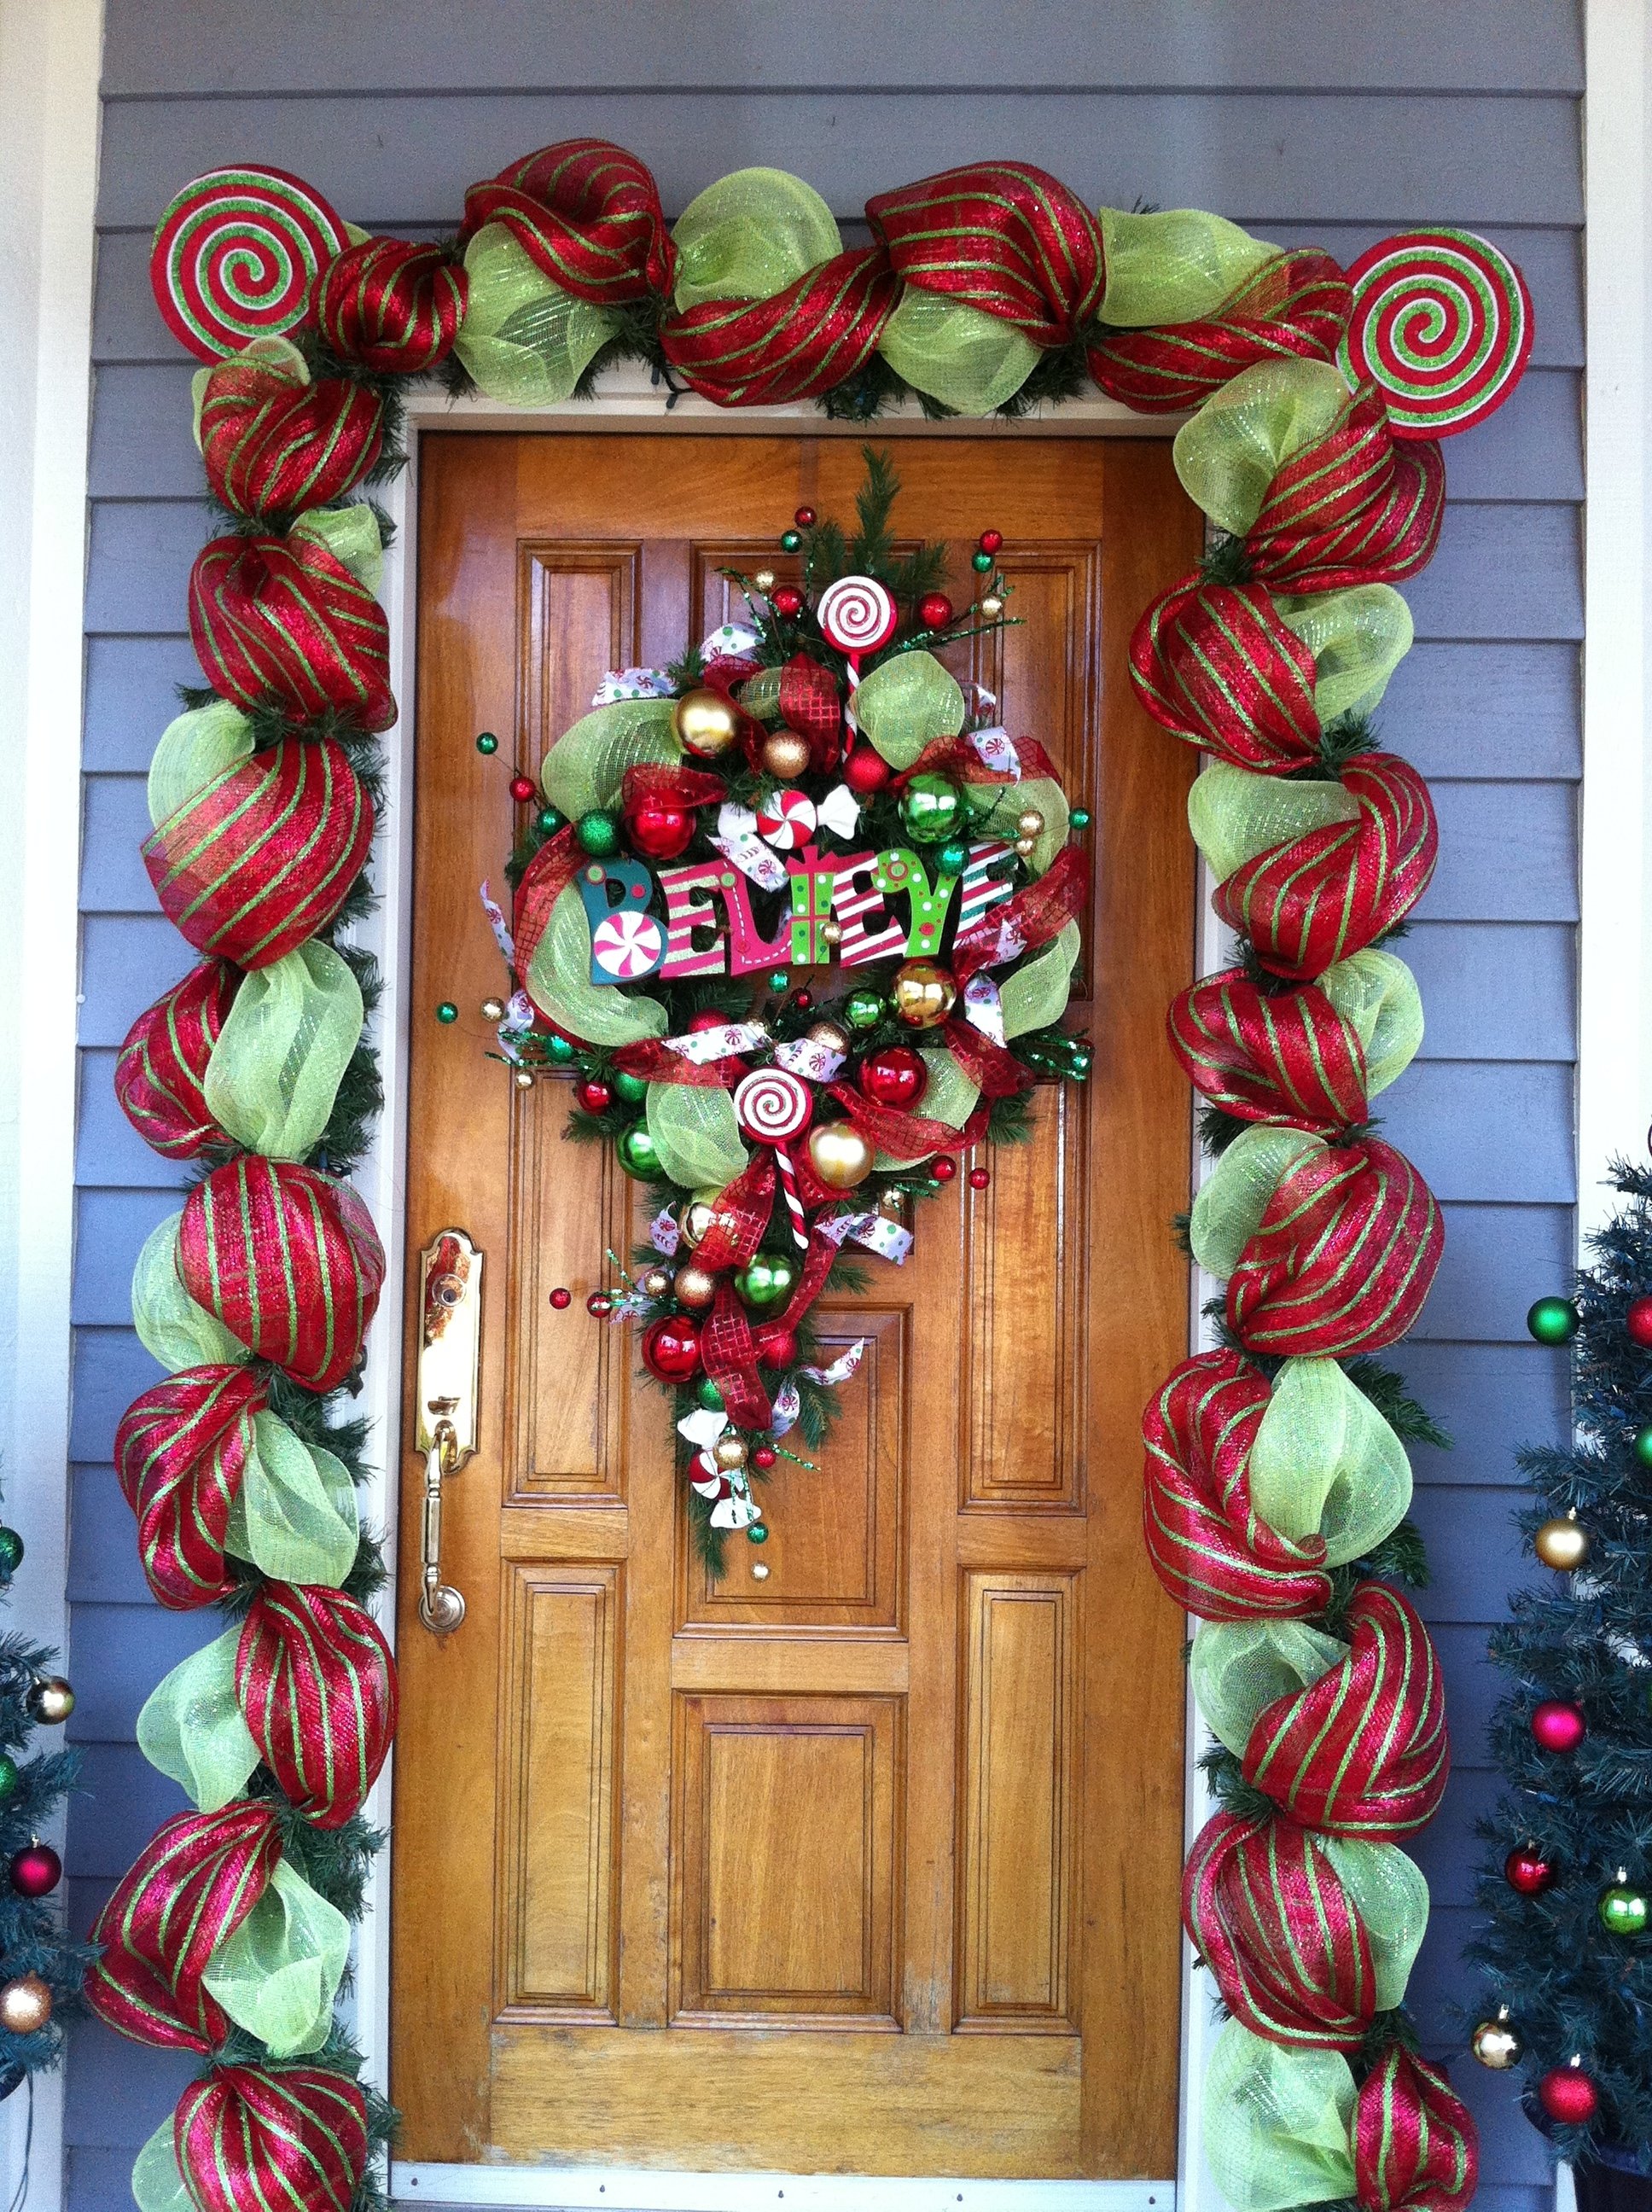 10 Fabulous Decorating With Mesh Ribbon Ideas front door decorations with floral mesh ribbon my christmas 2012 2022